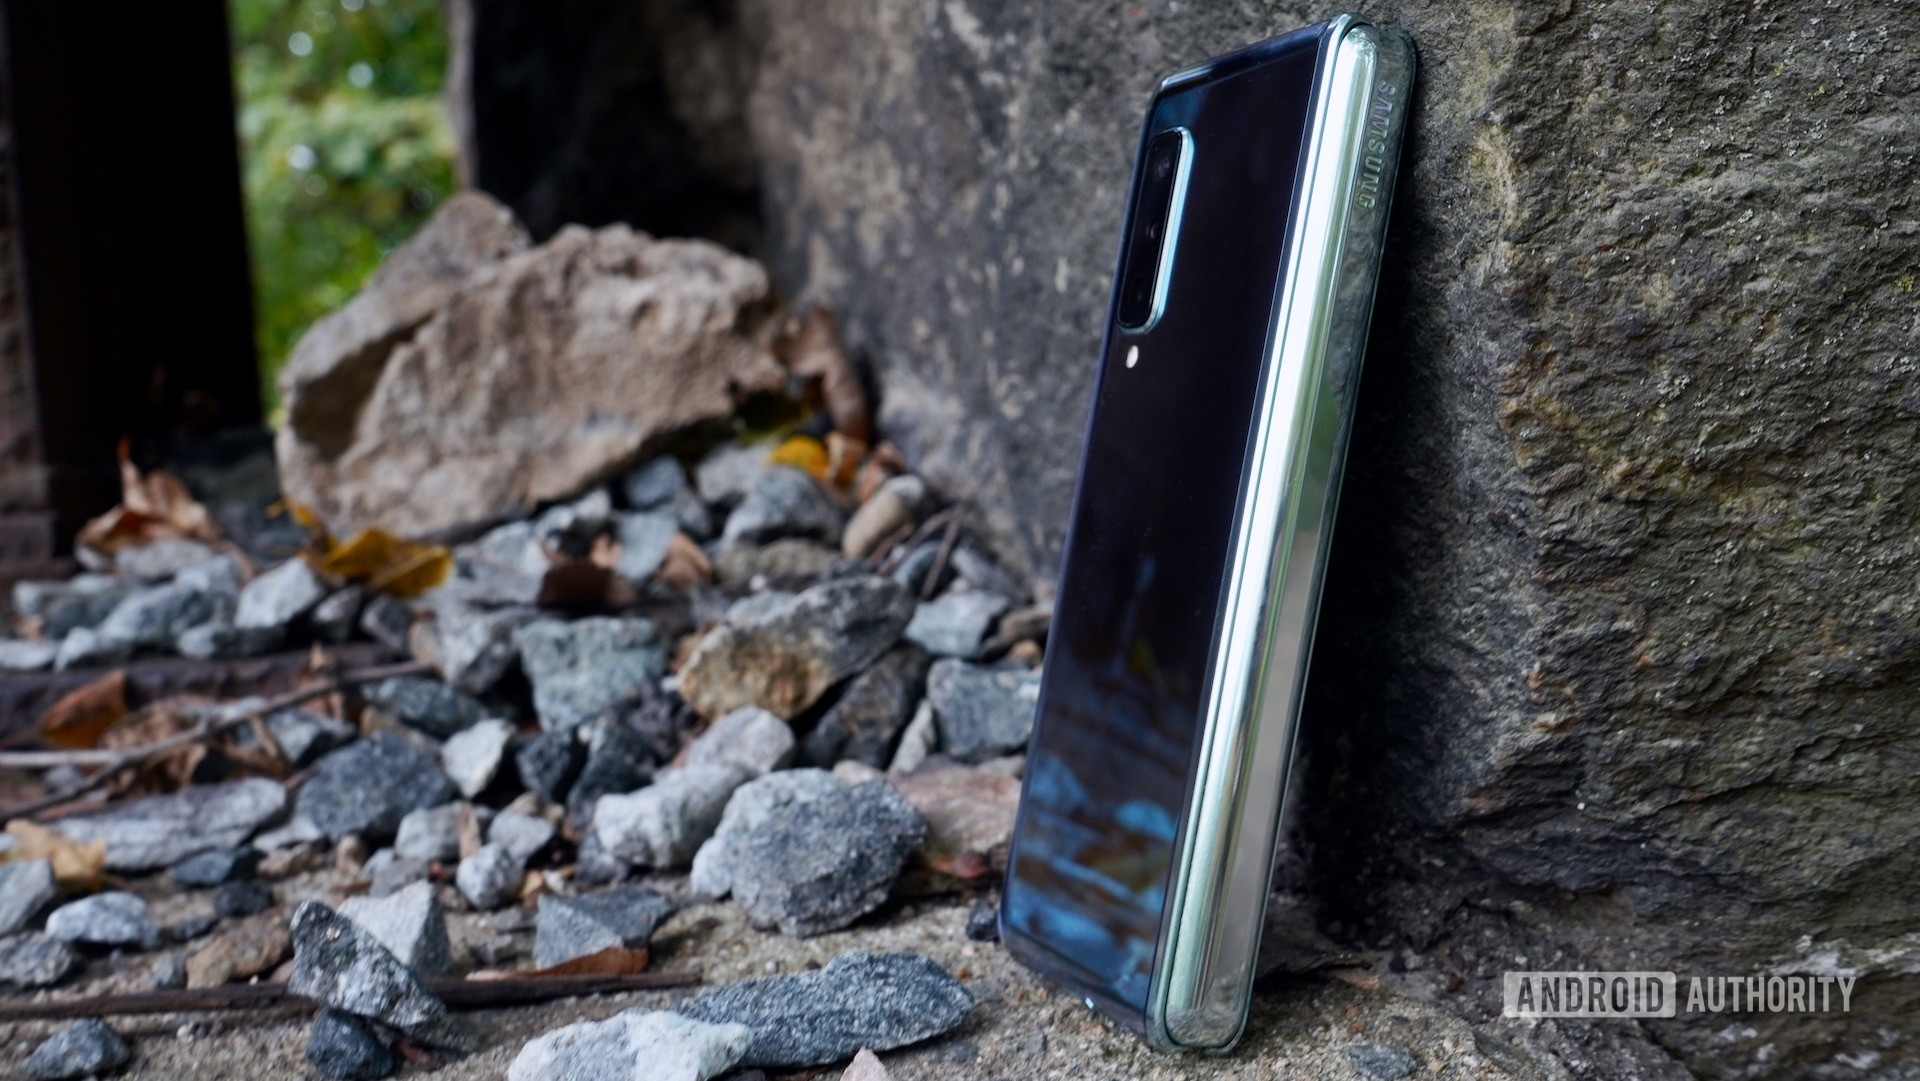 Samsung Galaxy Fold review on repose with rocks